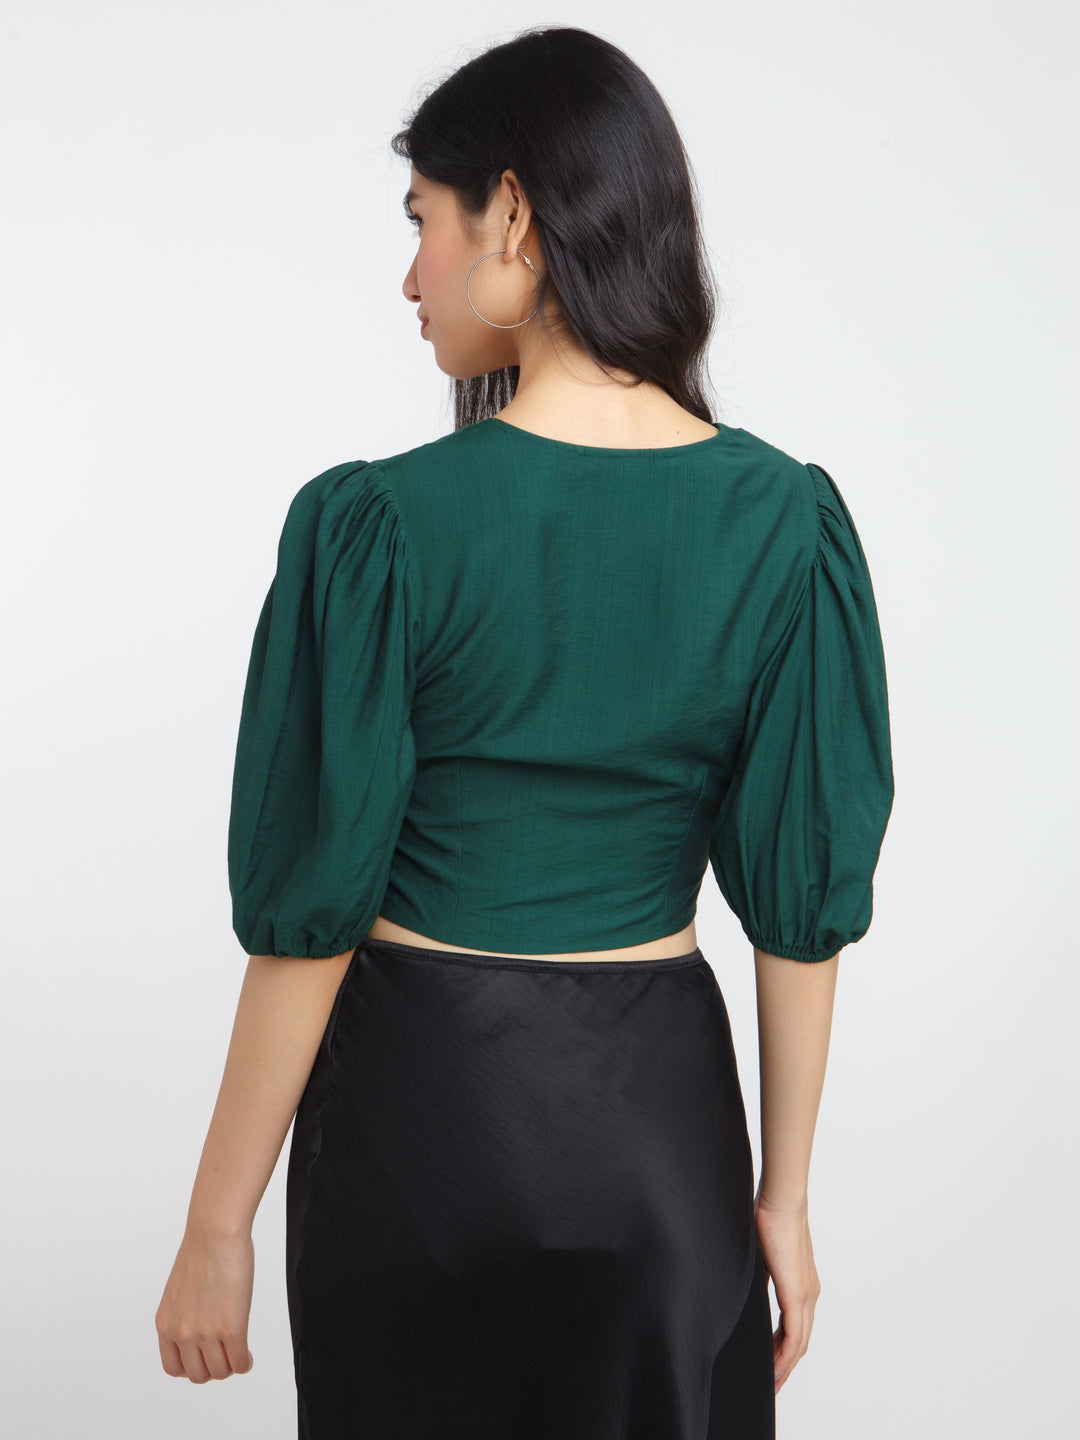 Green Solid Twisted Top For Women